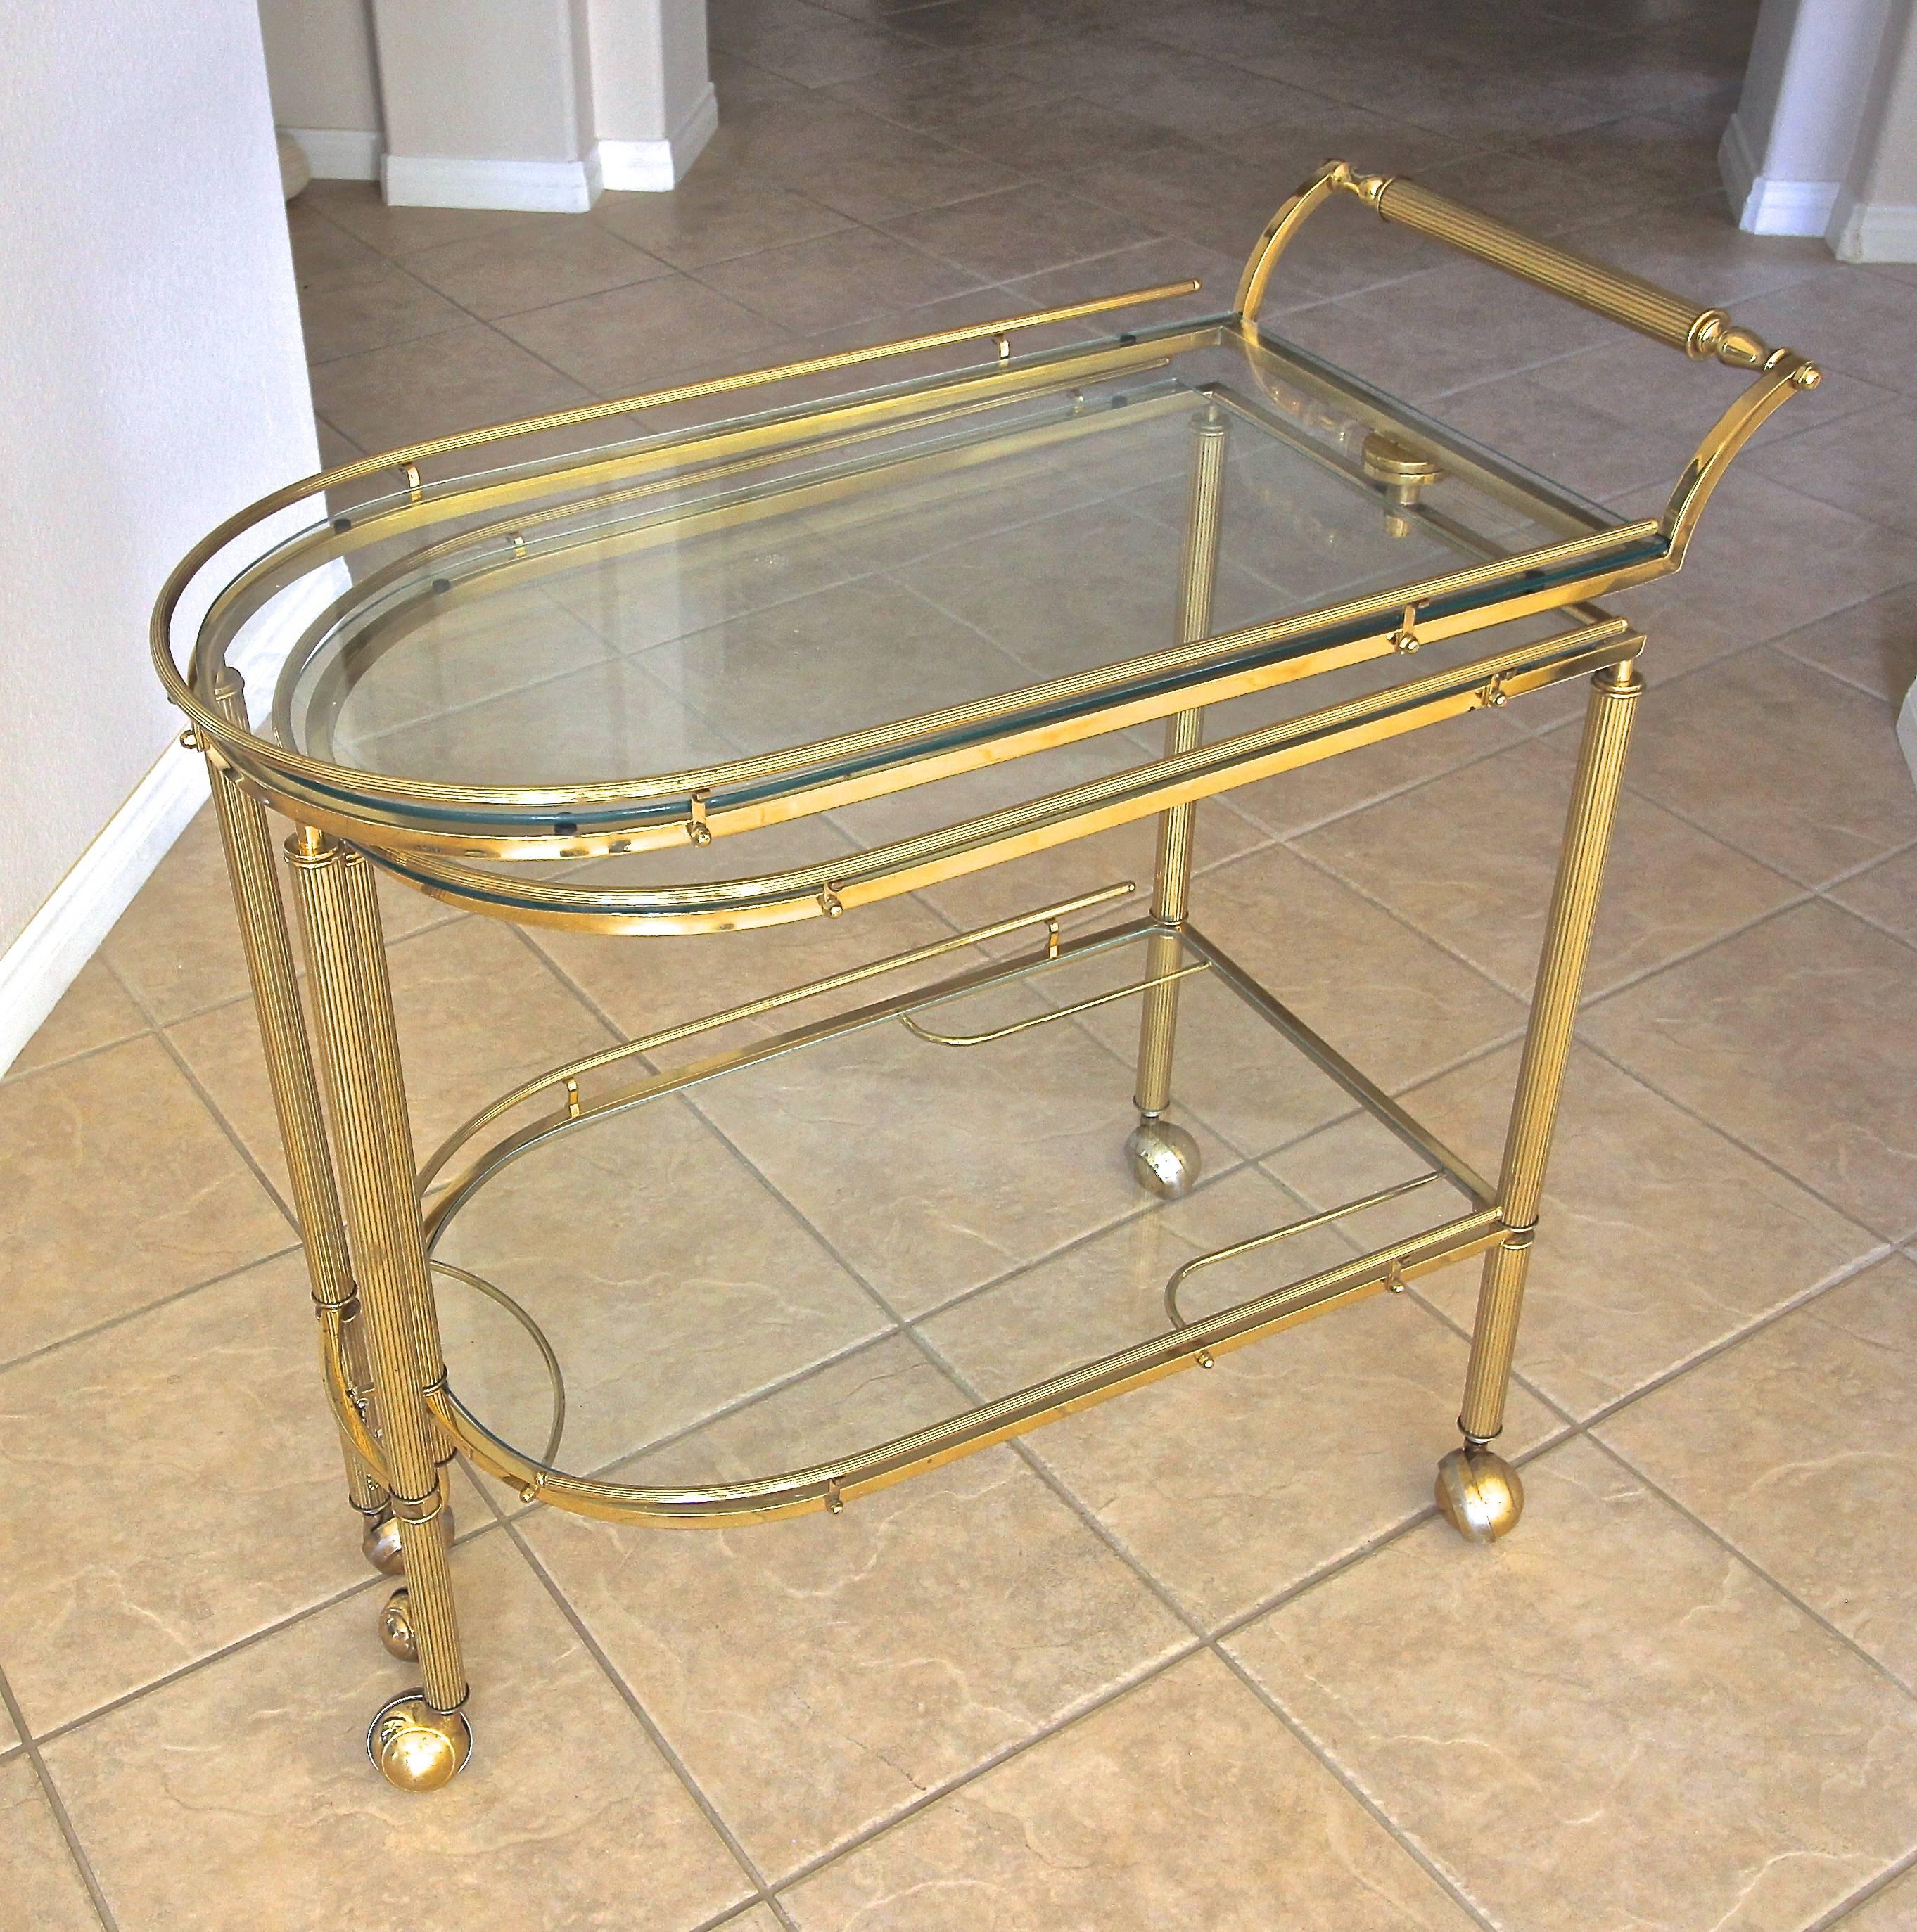 Hard to find vintage Italian three-tier brass bar or tea cart with reeded legs and glass inset tops. The bar cart swivels to open at various positions revealing three surfaces for optimum usage. Well crafted quality piece with rich brass patina. Bar